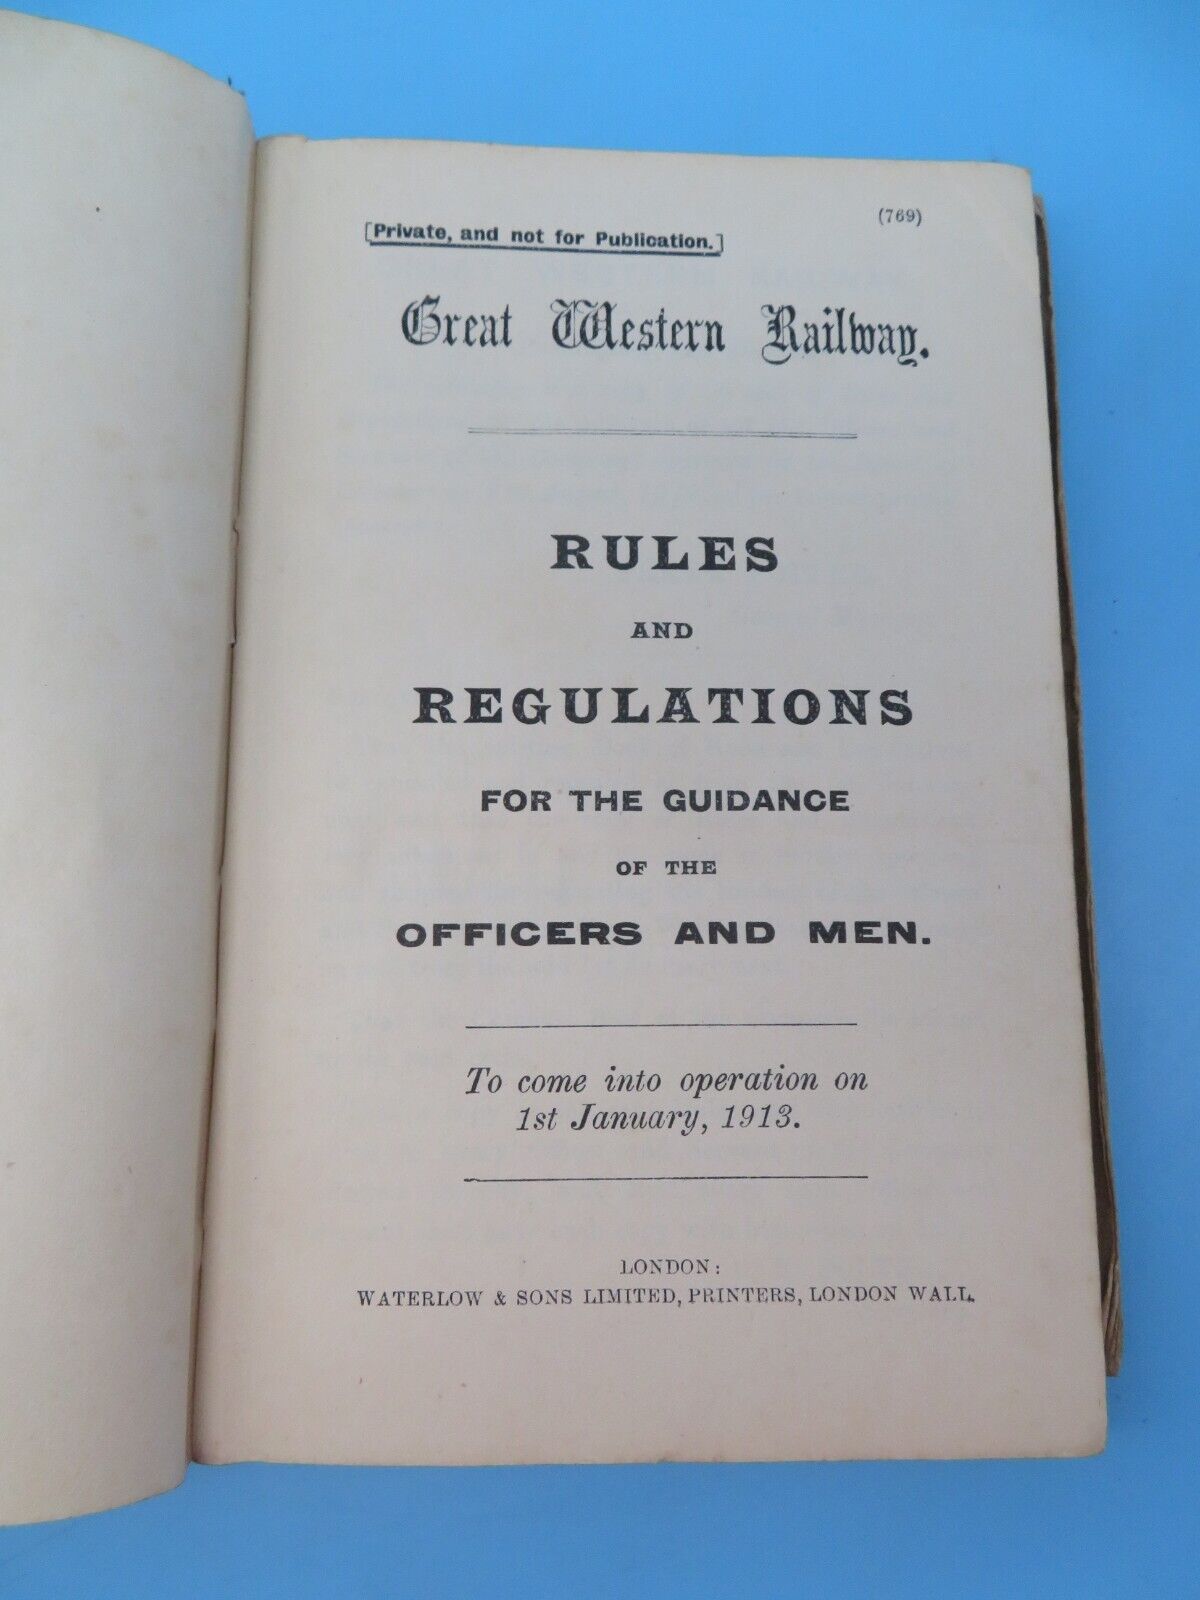 GWR Rules and Regulations For The Guidance Of The Officers and Men Jan 1913 HB